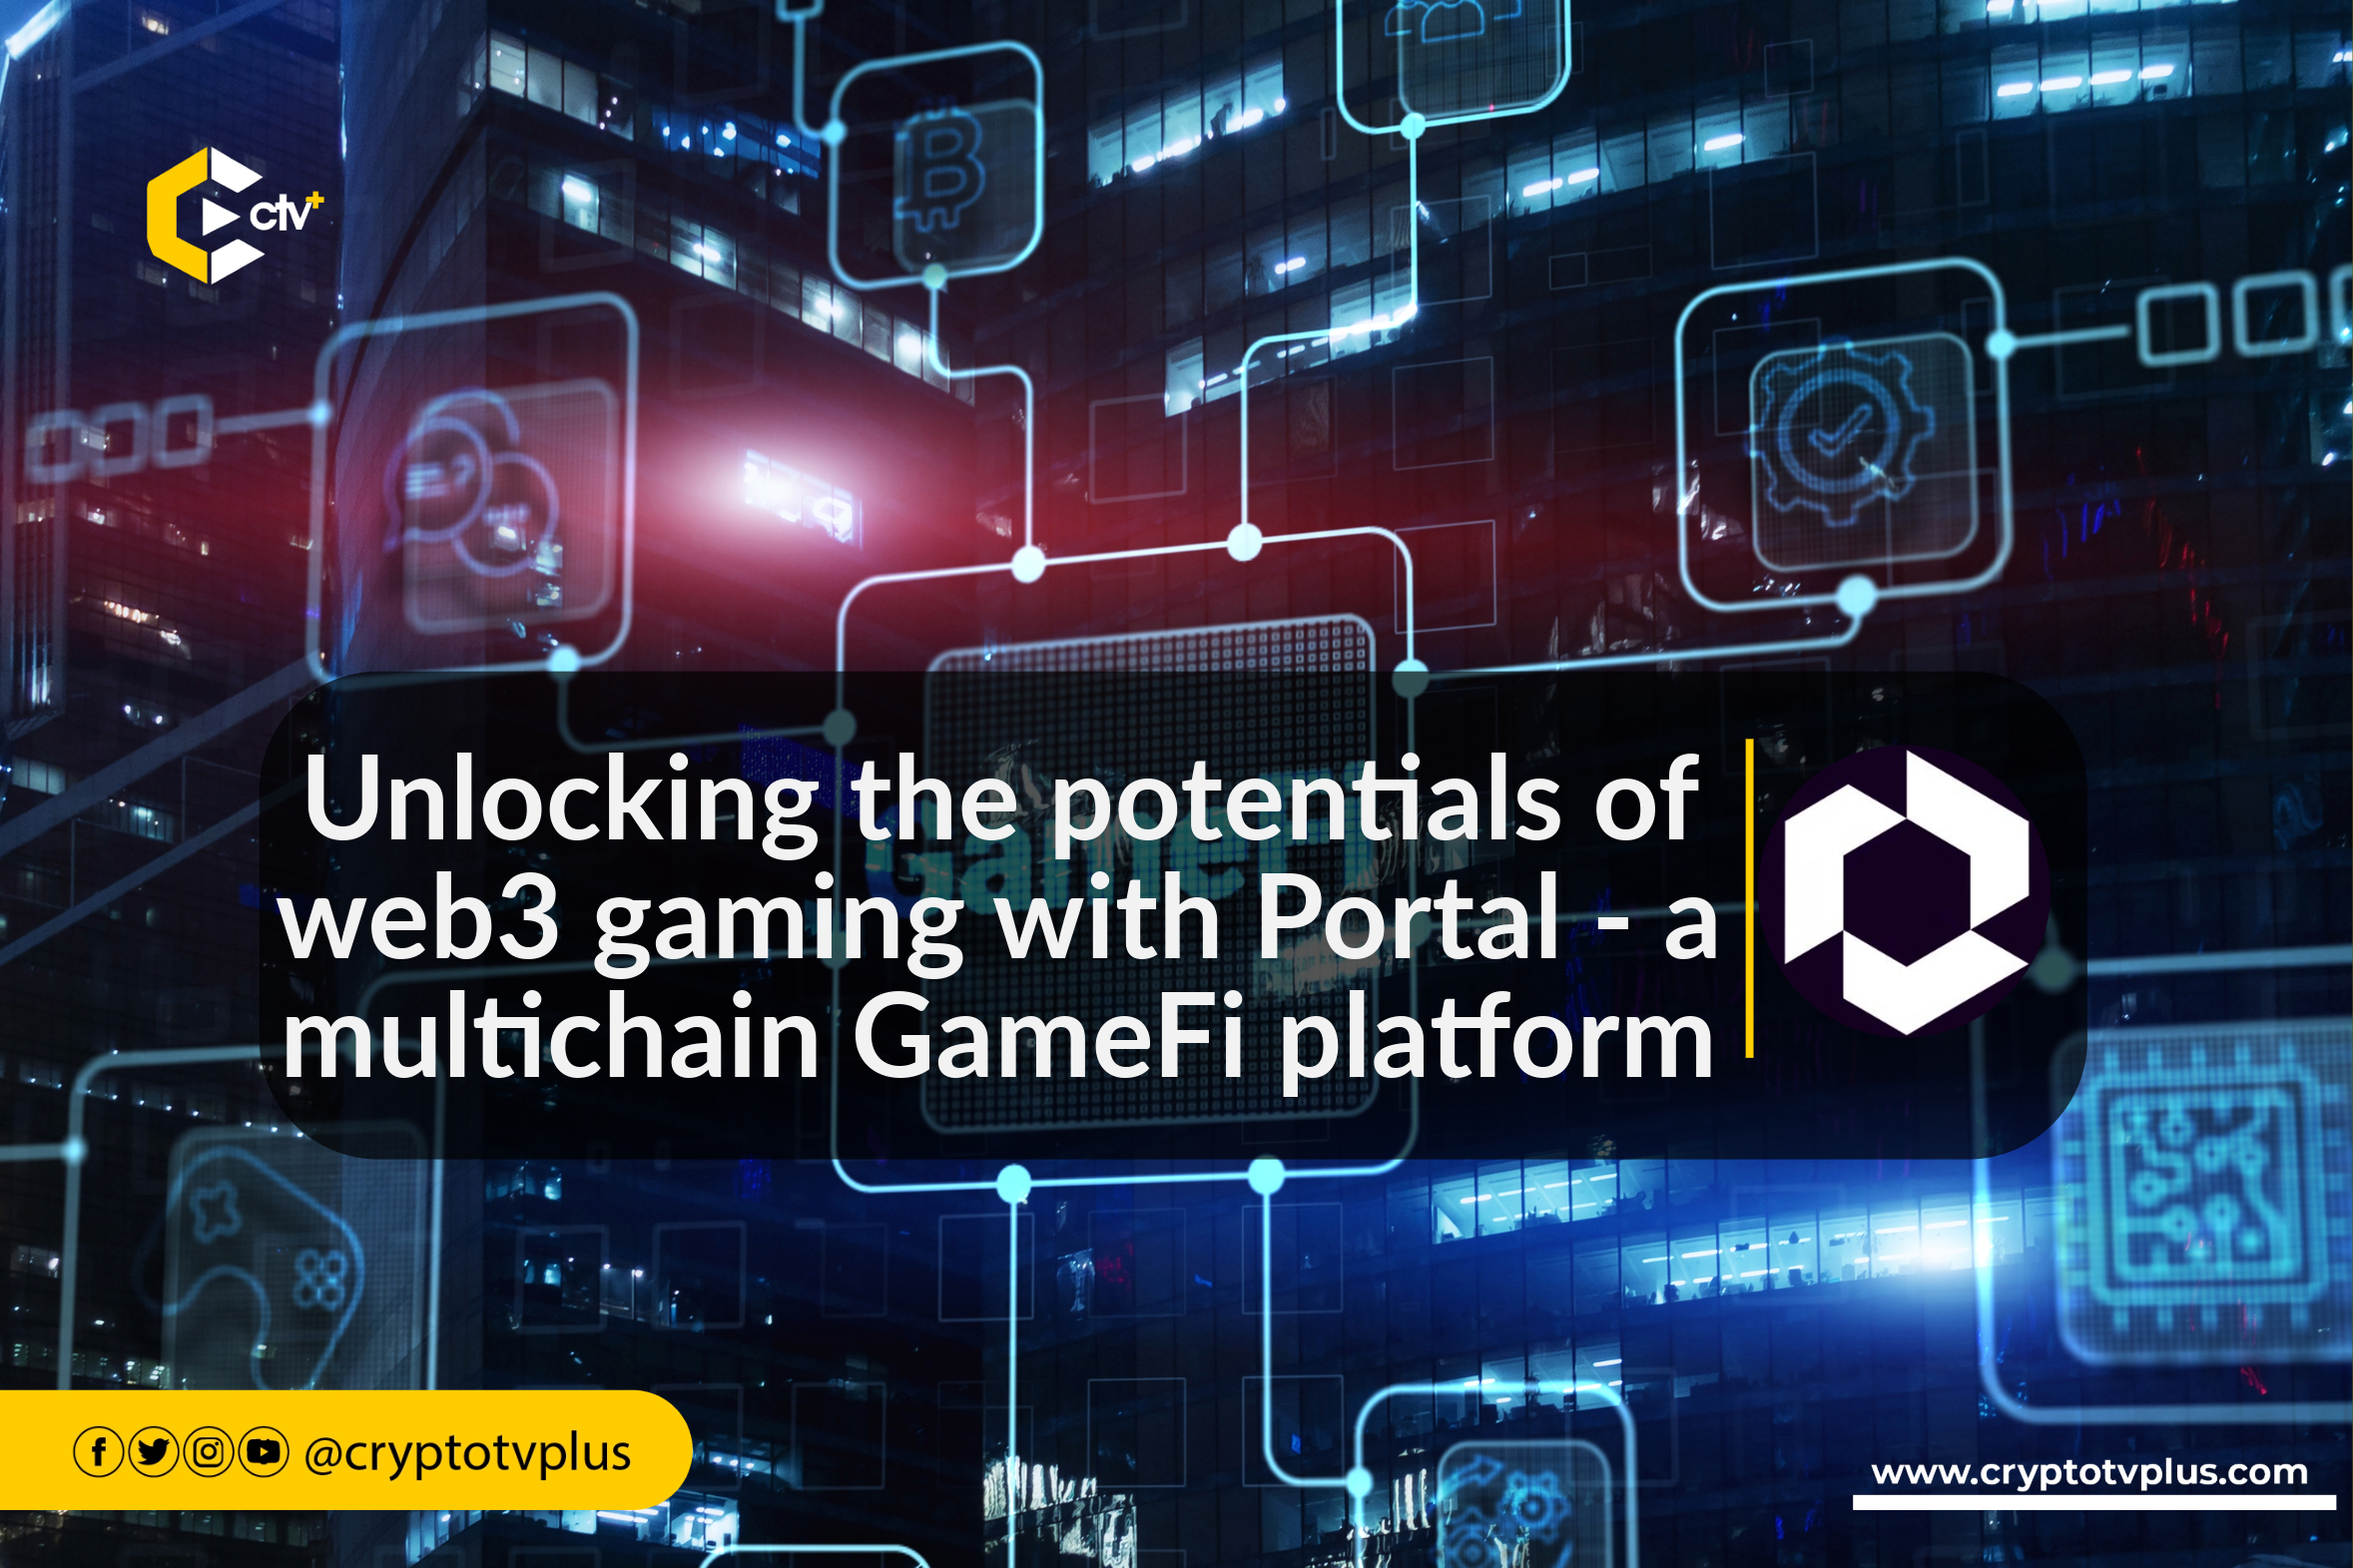 Unlocking the potentials of web3 gaming with Portal - a multichain GameFi platform